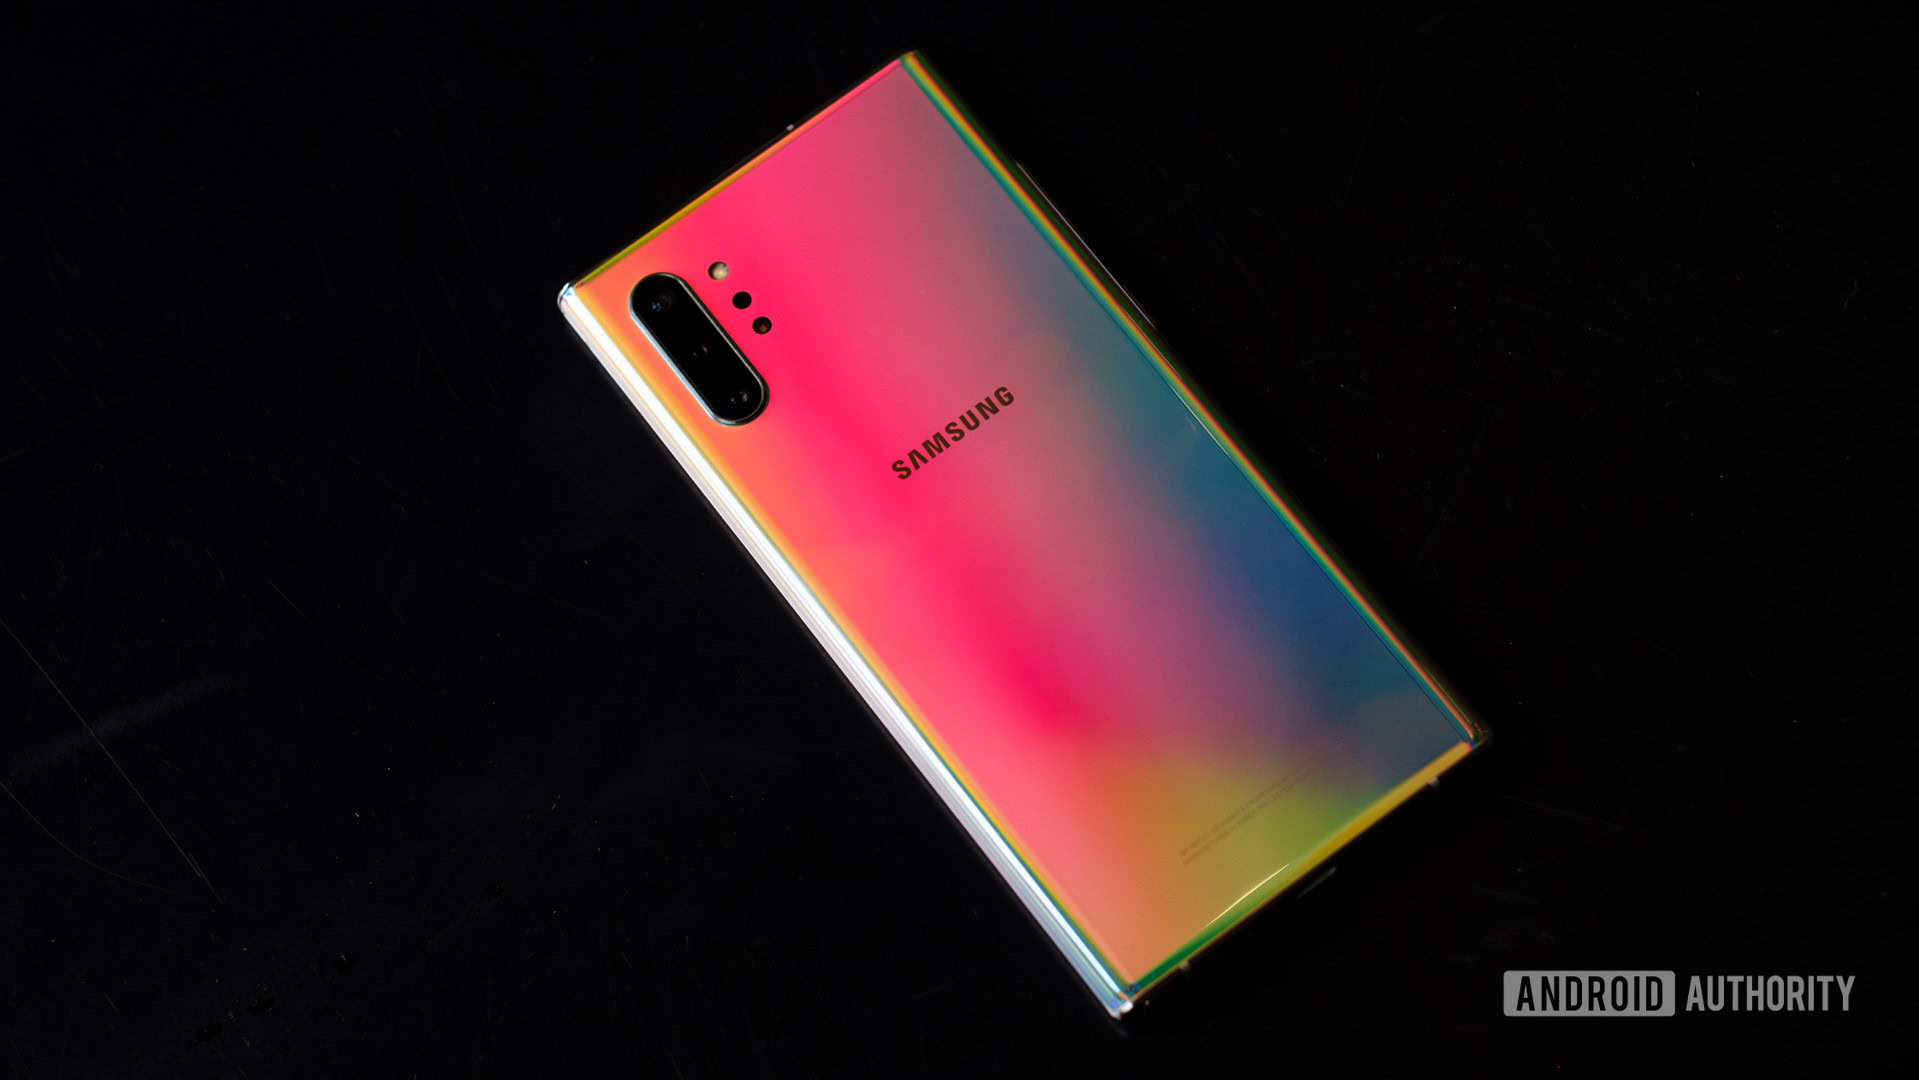 Samsung Galaxy Note 10 Plus review: Q: Another word for excellent? A:  Samsung